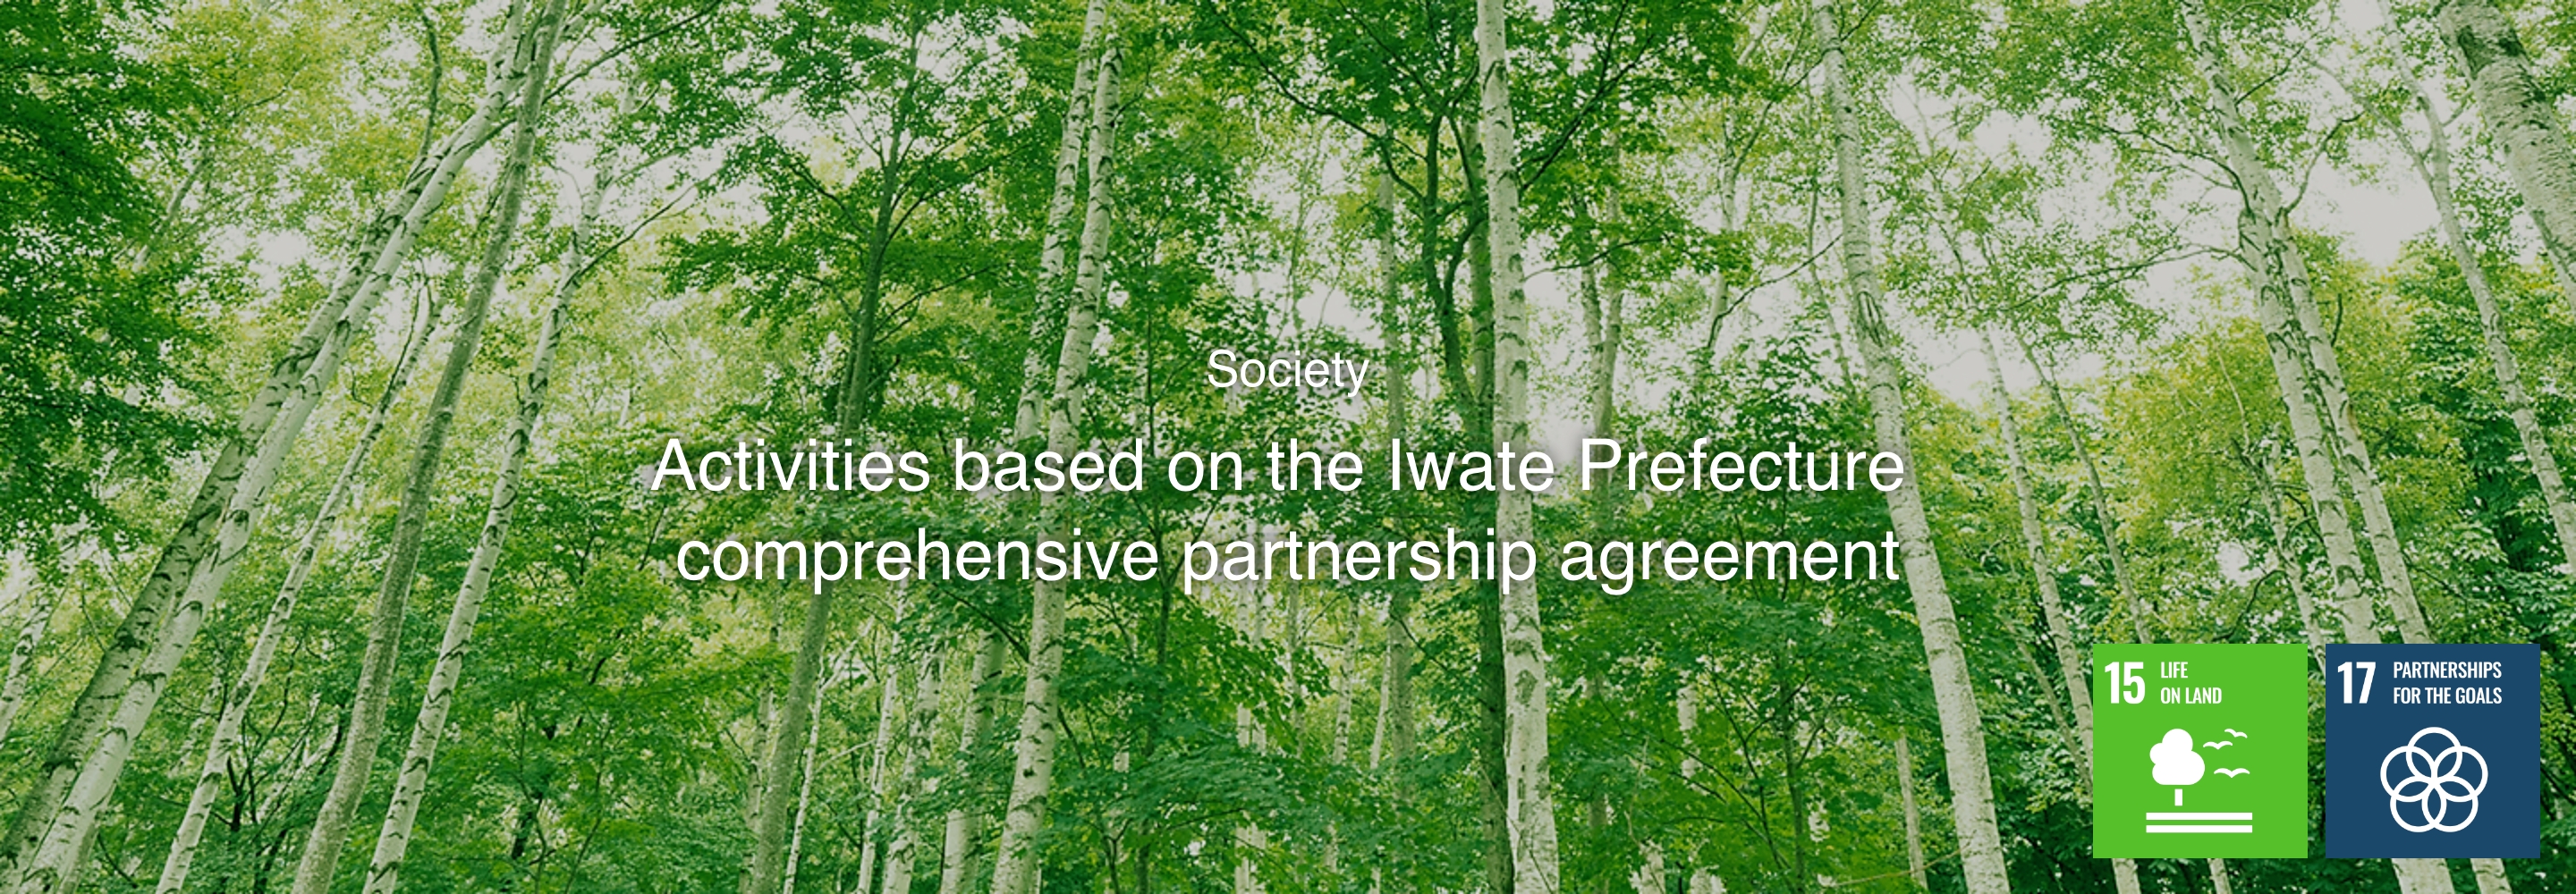 Society Activities based on the iwate prefecture comprehensive partnership agreement